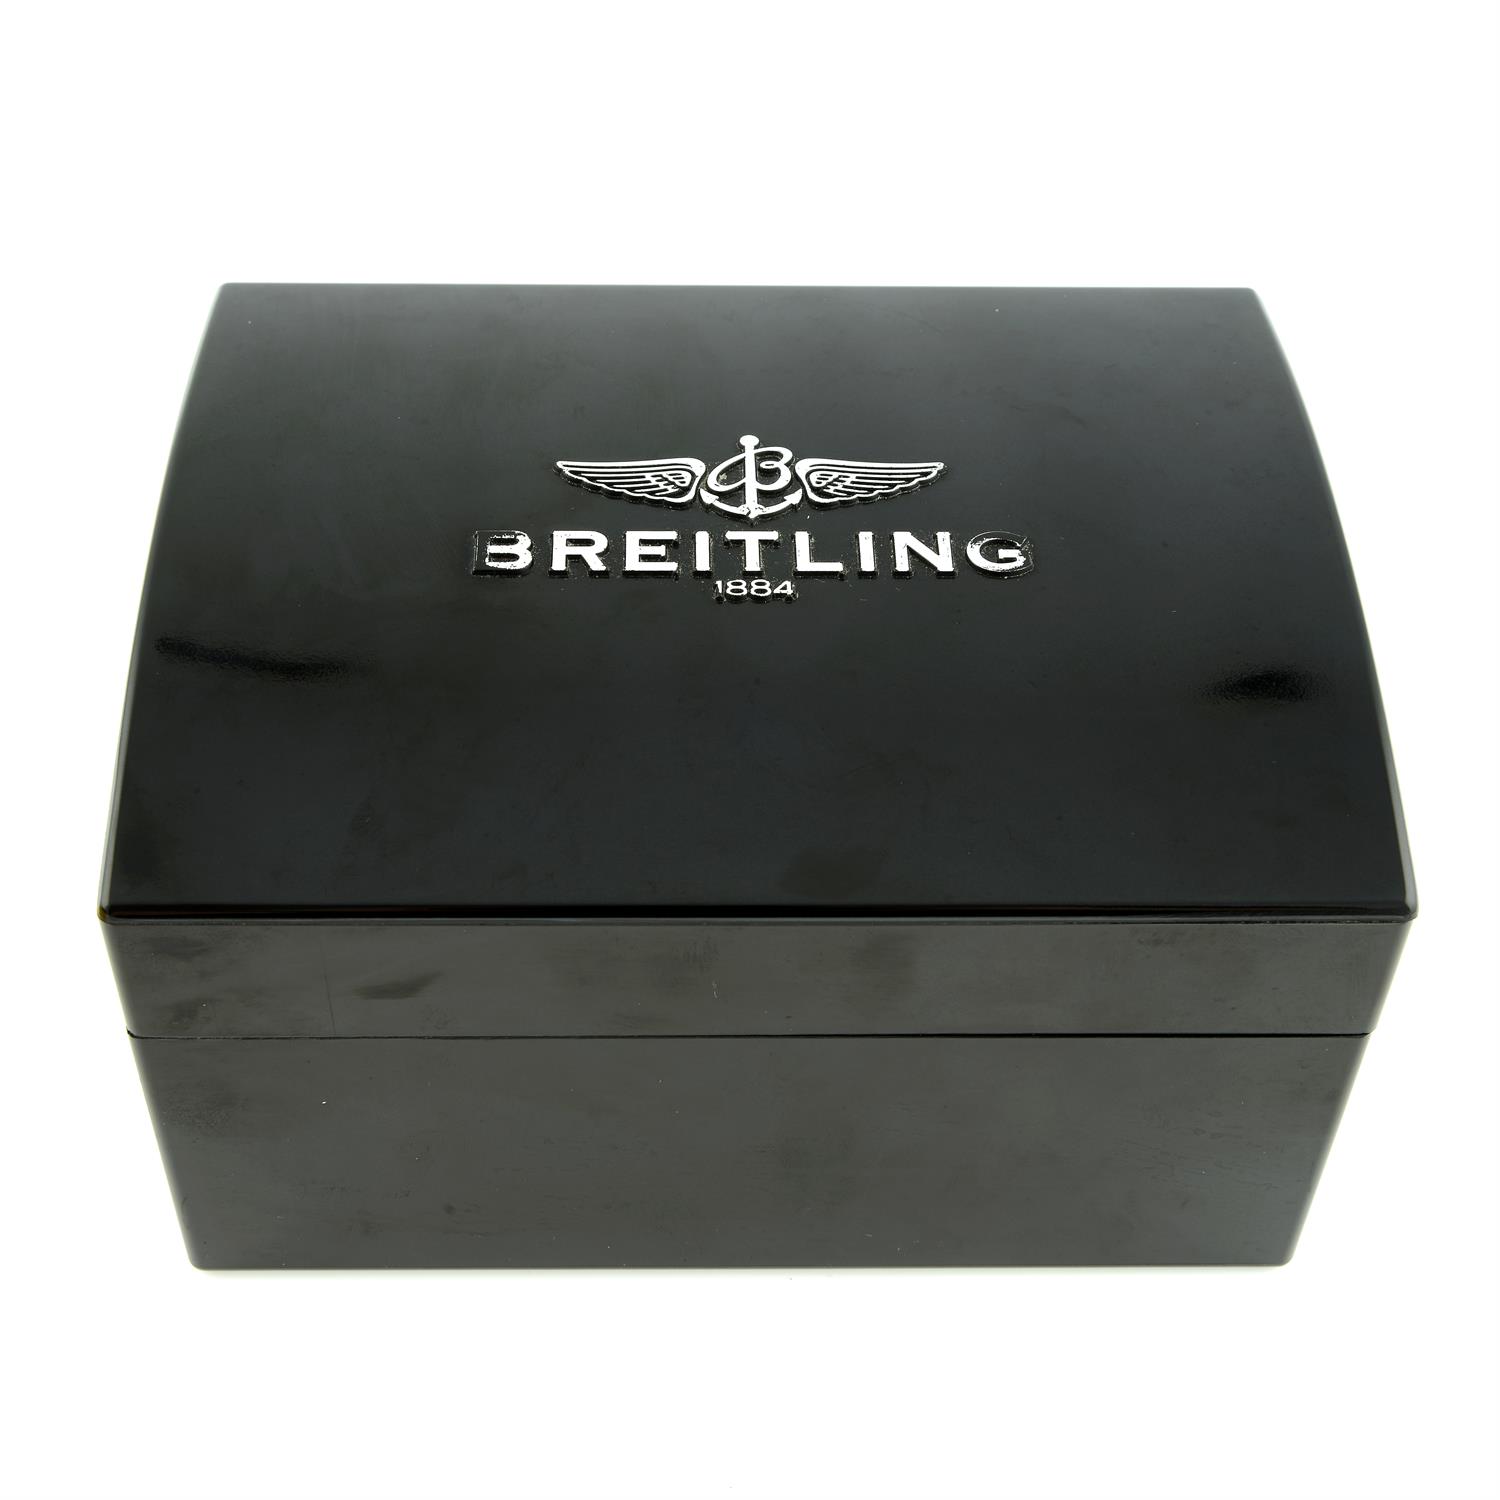 BREITLING - a PVD-coated stainless steel limited edition Super Avenger chronograph wrist watch, - Image 5 of 6